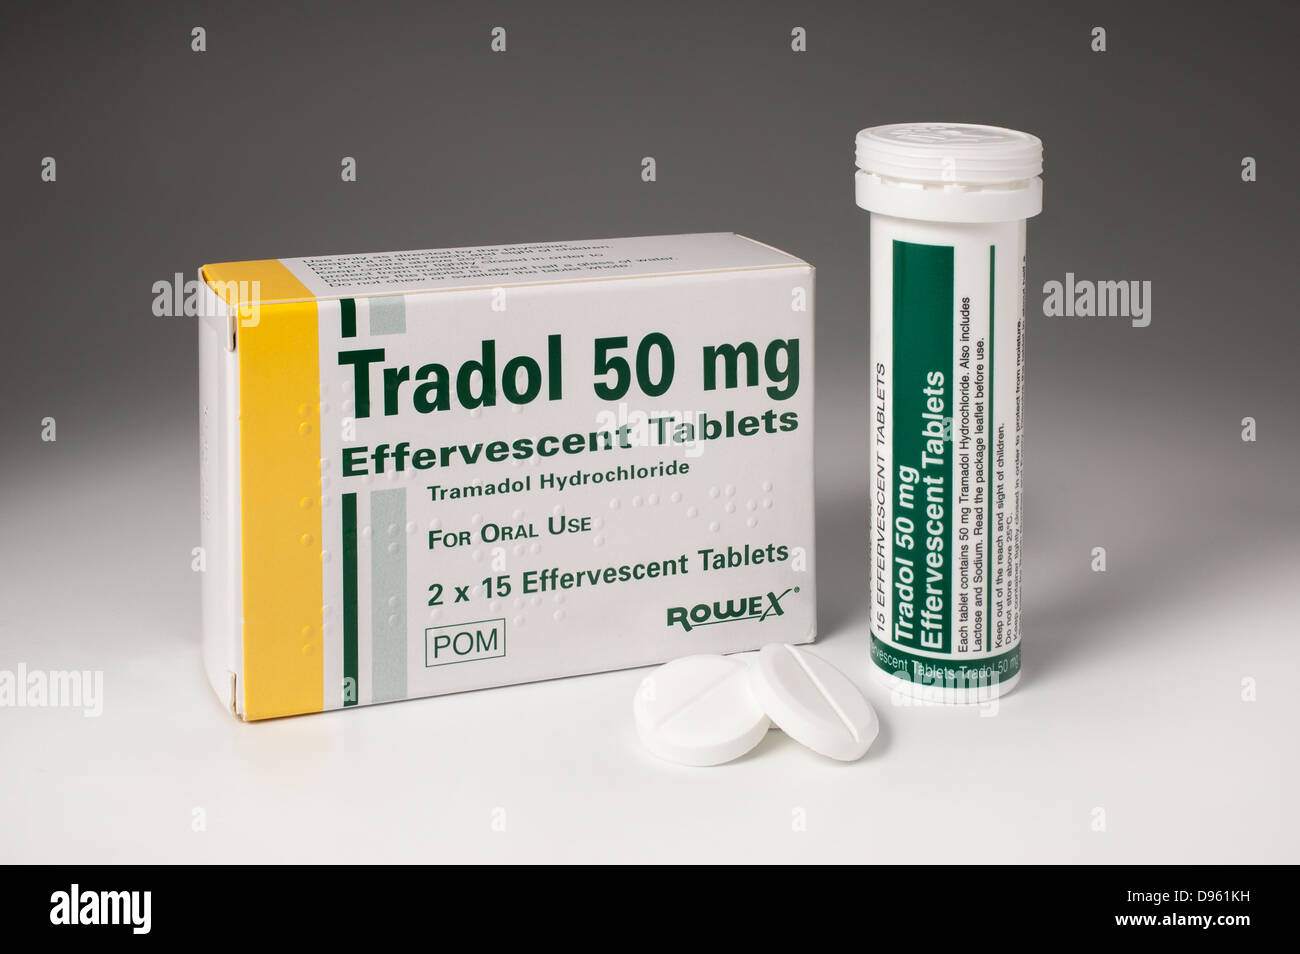 how effective is tramadol for pain relief